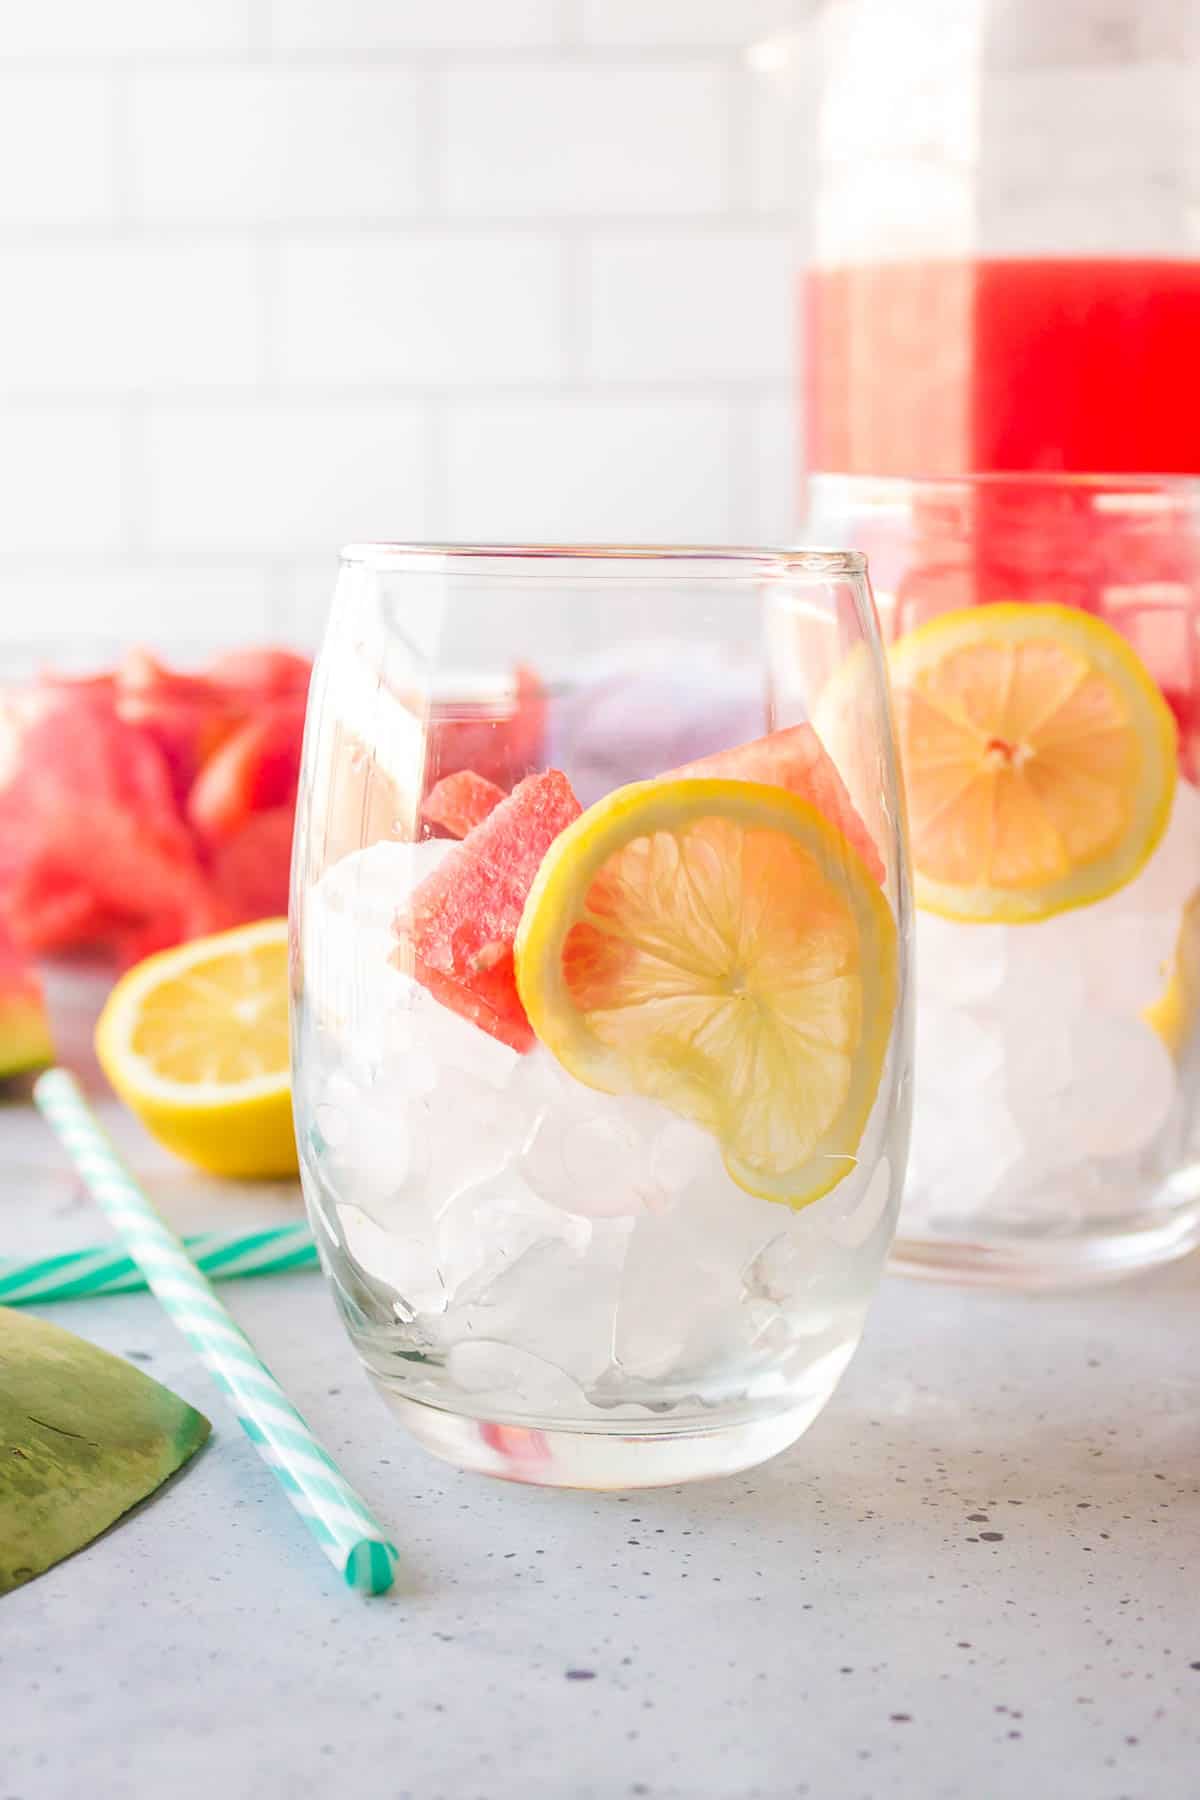 A glass with ice, thinly sliced lemonade, and a watermelon chunk.